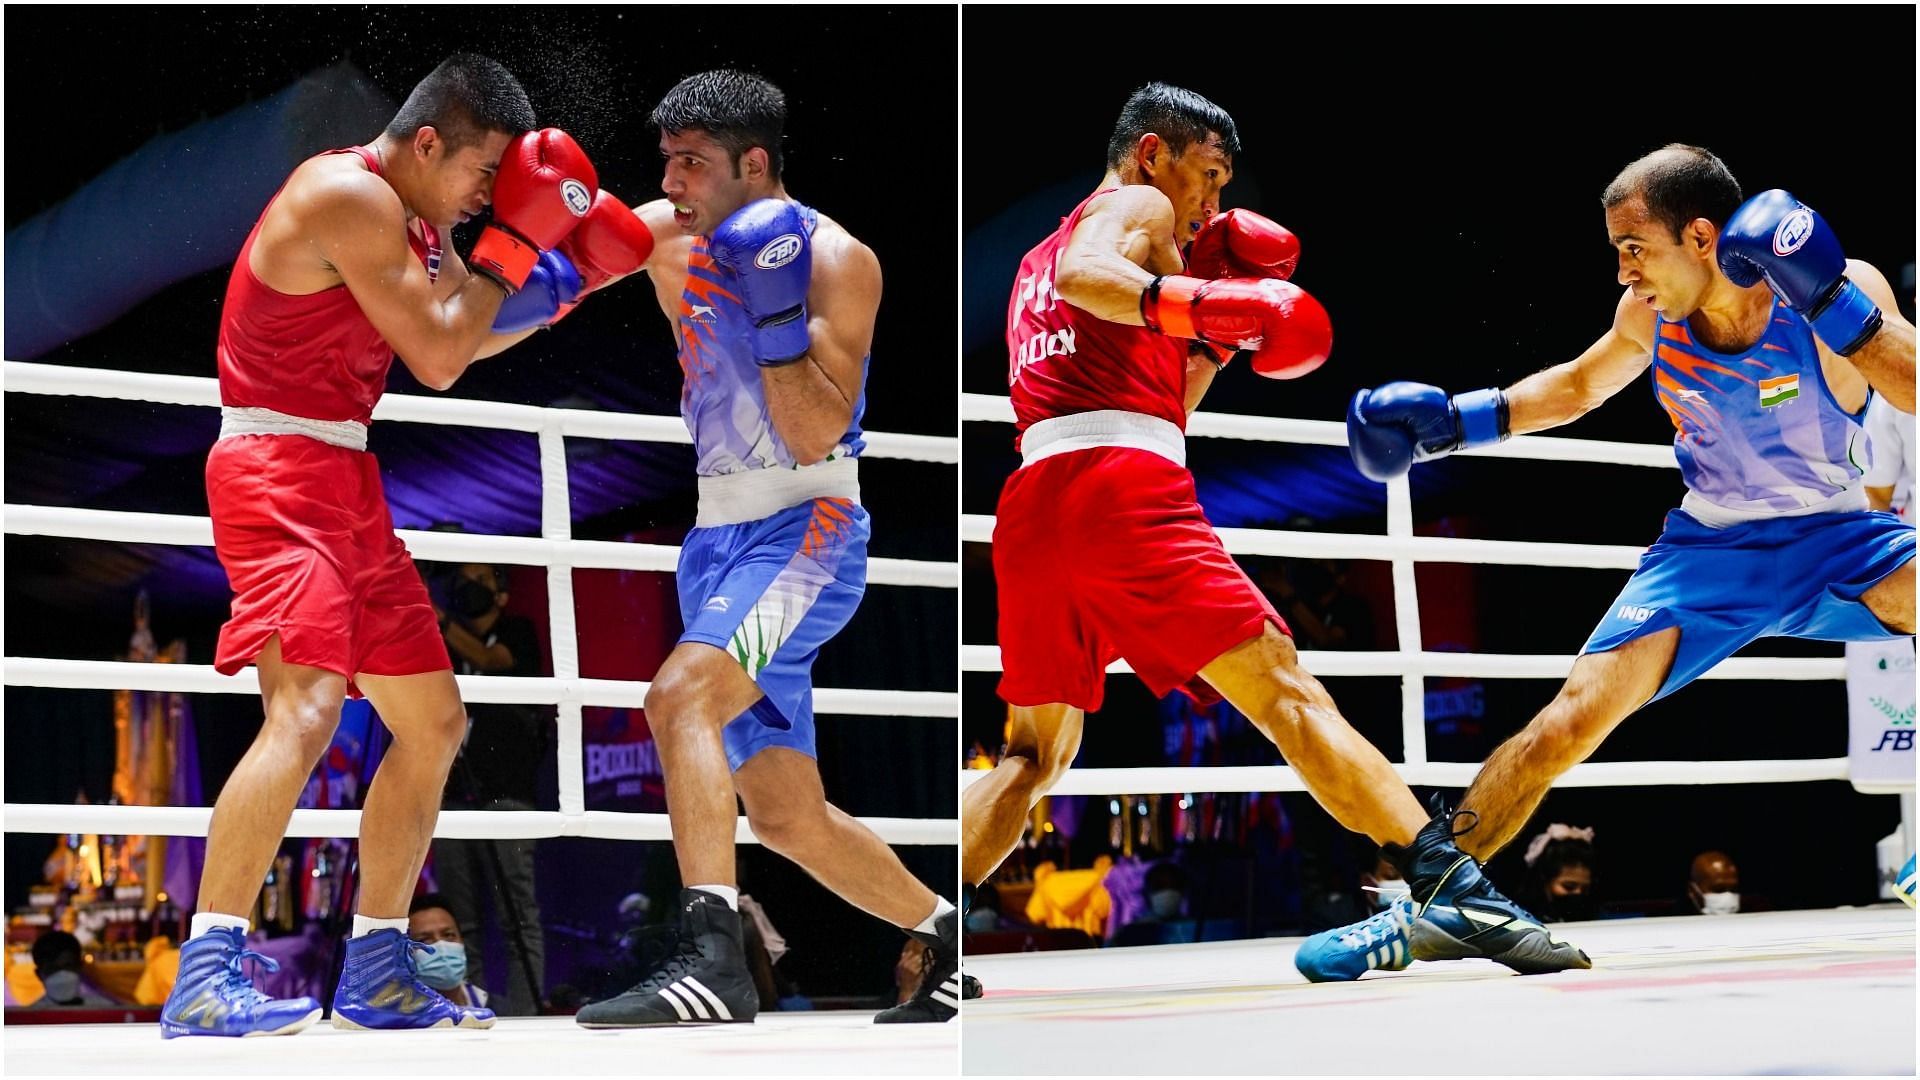 Indian pugilists Sumit Kundu (L) and Amit Panghal (R) in action (Pic Credits: BFI)